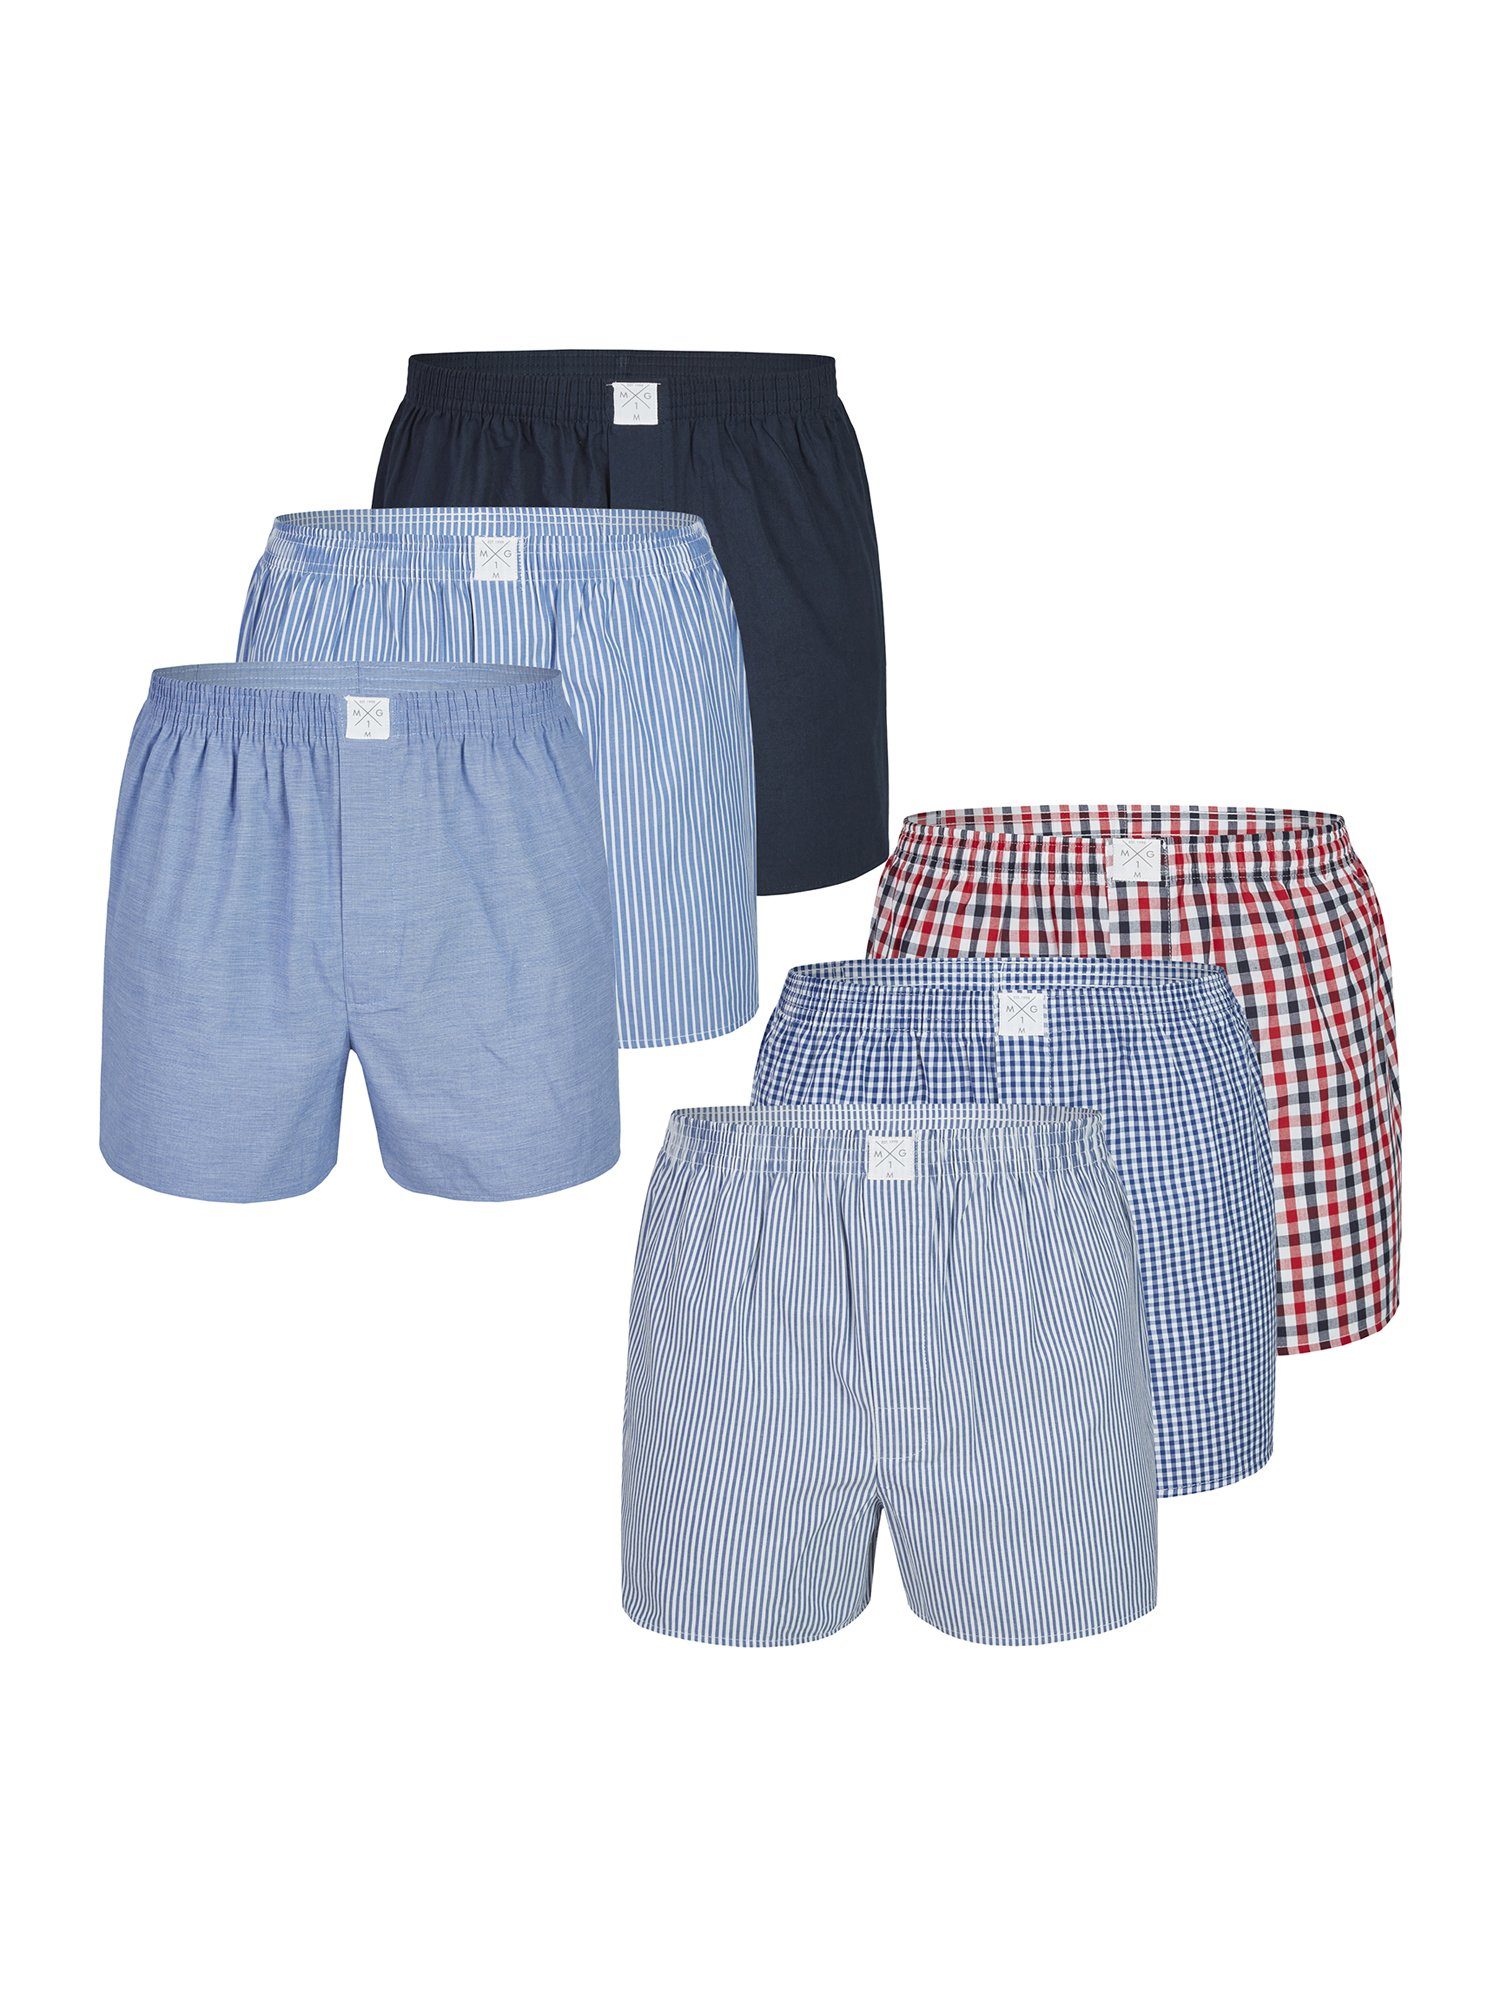 MG-1 Boxer Classics 6-Pack (6-St) Mix 4 | Boxer weit